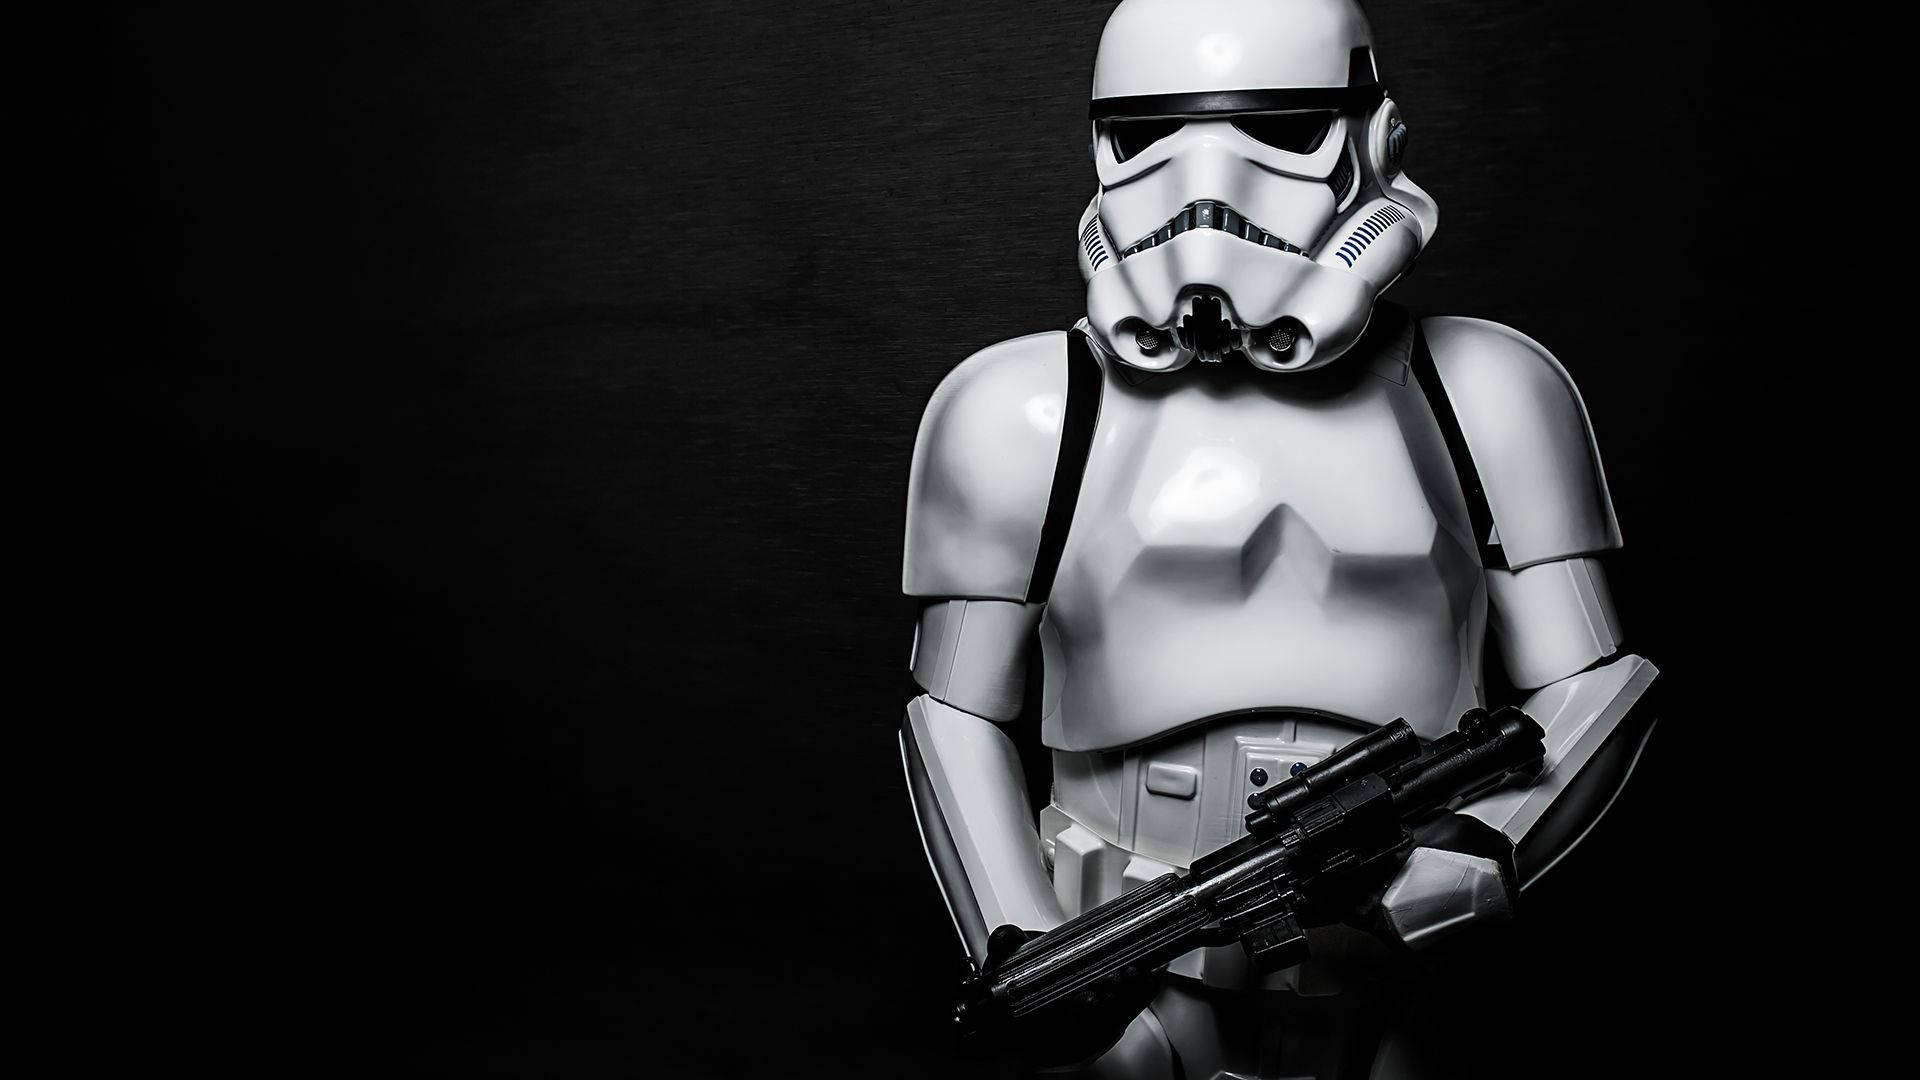 Imperial Stormtrooper Garrisoned and Ready Wallpaper